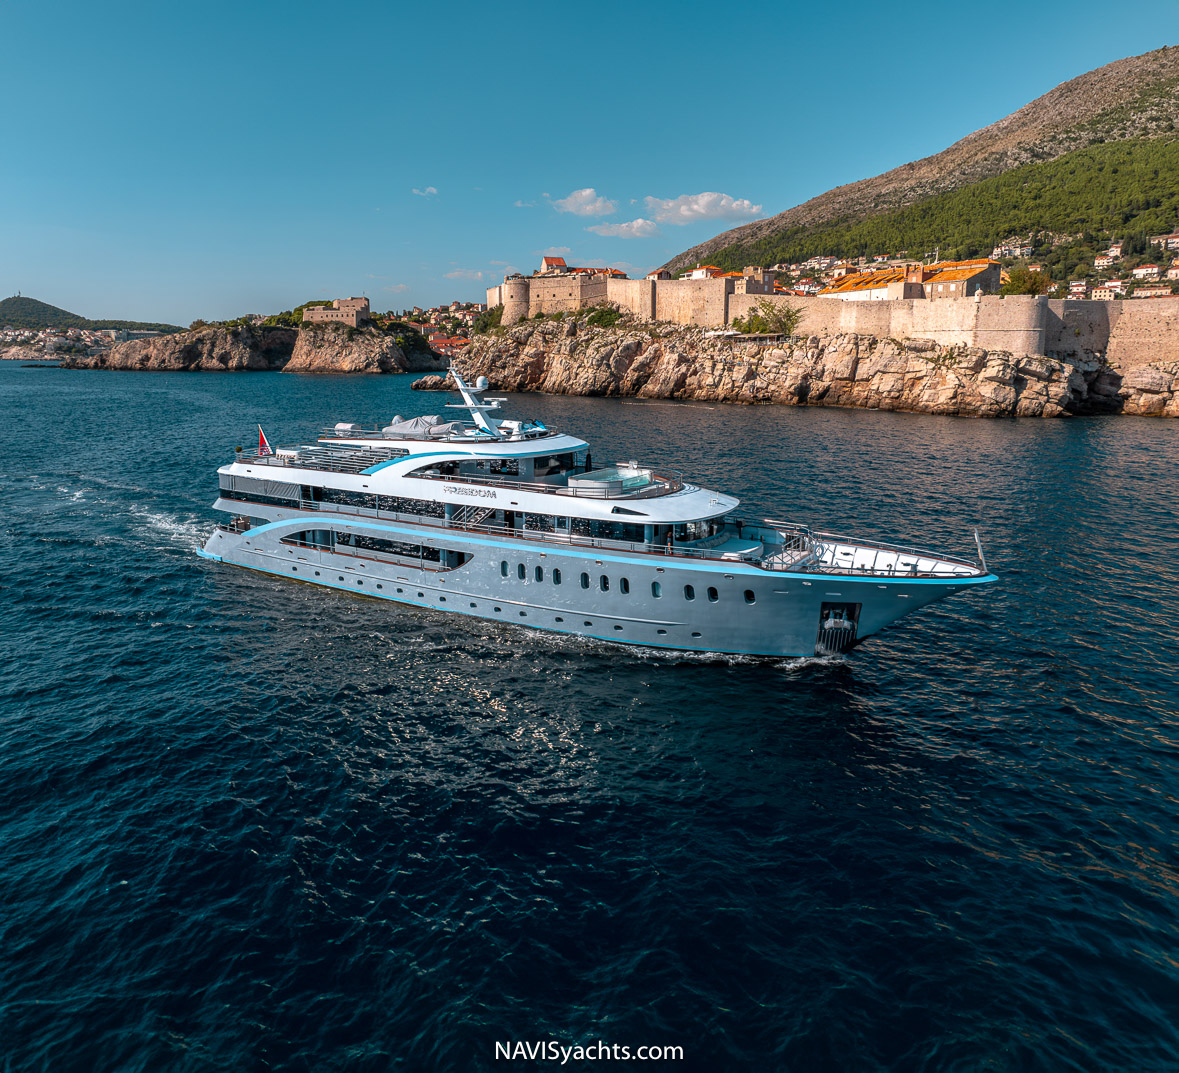 Goolets, a leading charter company in Croatia, represents the joy and fulfillment of luxury yachting.